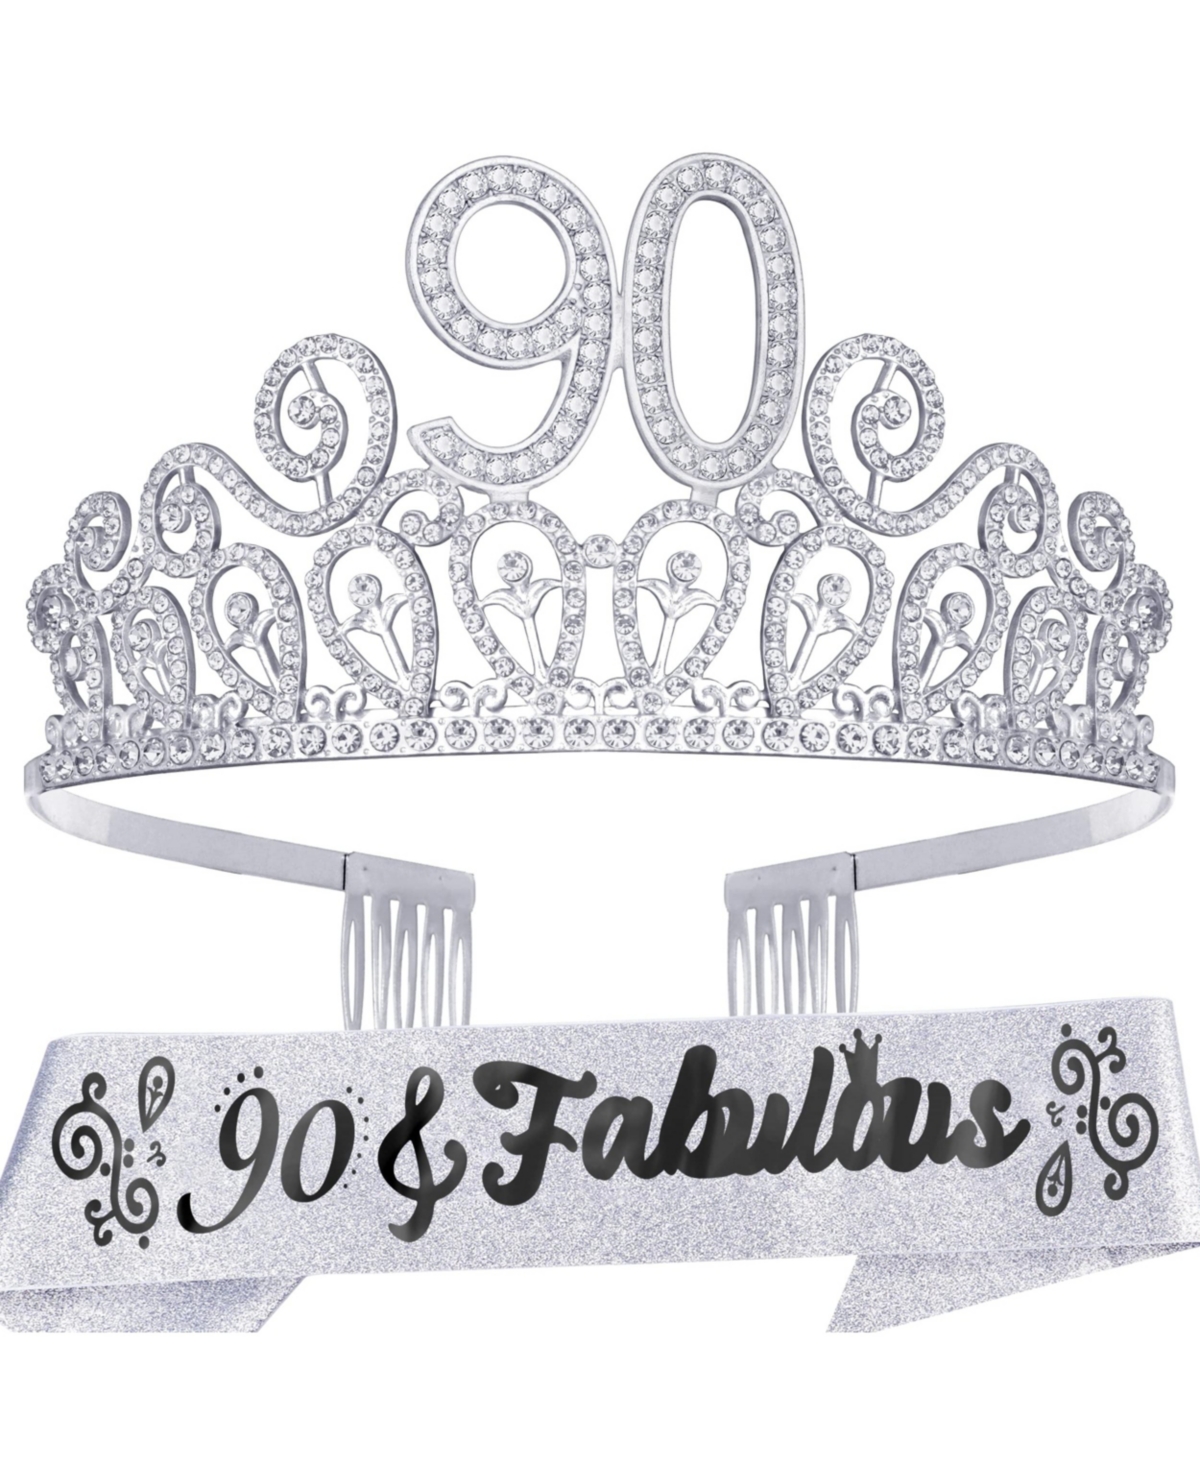 90th Birthday Sash and Tiara for Women - Glitter Sash and Ripples Rhinestone Silver Metal Tiara, Perfect for 90th Birthday Celebrations and